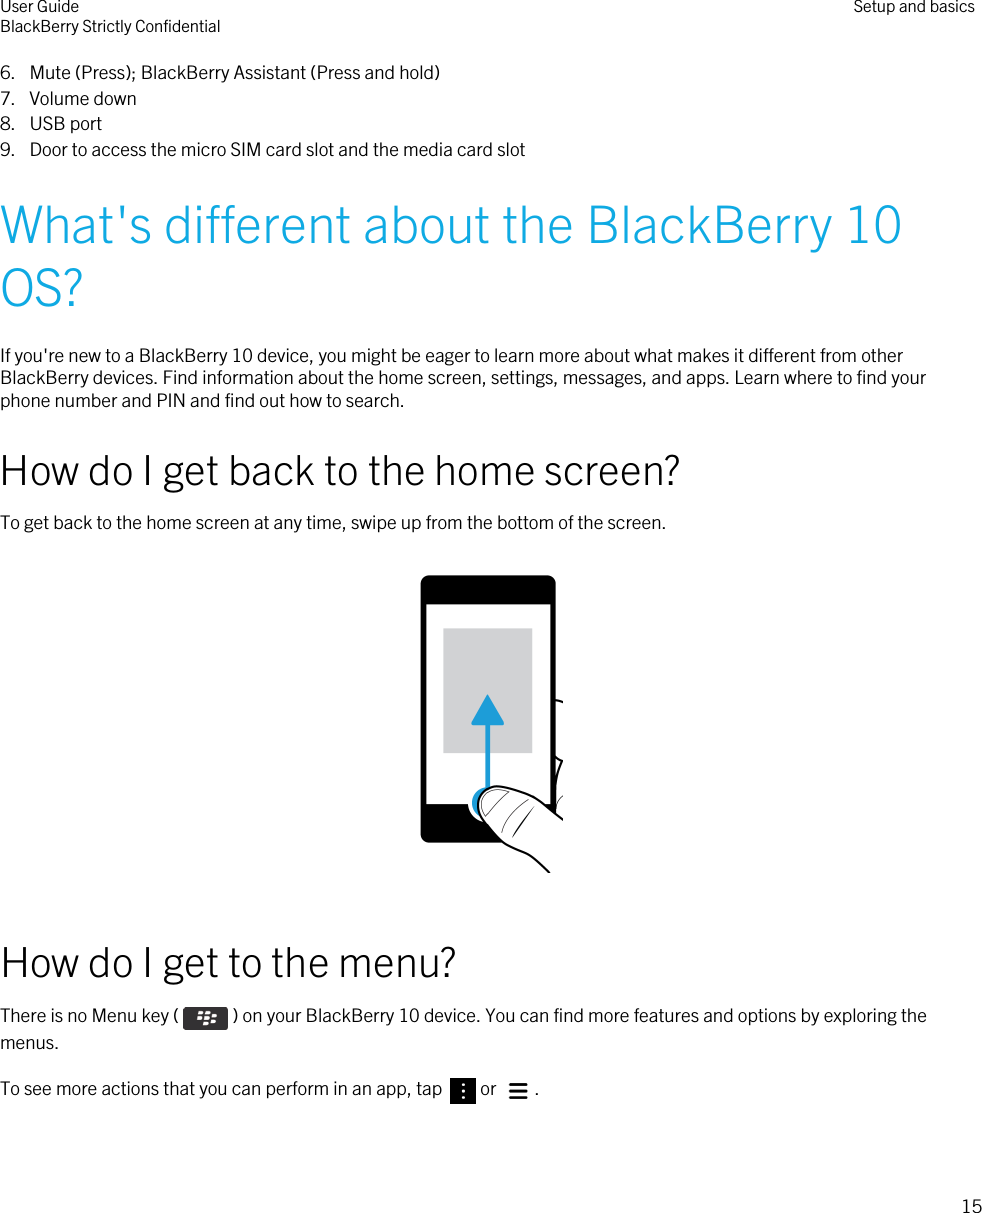 6. Mute (Press); BlackBerry Assistant (Press and hold)7. Volume down8. USB port9. Door to access the micro SIM card slot and the media card slotWhat&apos;s different about the BlackBerry 10 OS?If you&apos;re new to a BlackBerry 10 device, you might be eager to learn more about what makes it different from other BlackBerry devices. Find information about the home screen, settings, messages, and apps. Learn where to find your phone number and PIN and find out how to search.How do I get back to the home screen?To get back to the home screen at any time, swipe up from the bottom of the screen.  How do I get to the menu?There is no Menu key ( ) on your BlackBerry 10 device. You can find more features and options by exploring the menus.To see more actions that you can perform in an app, tap  or  . User GuideBlackBerry Strictly Confidential Setup and basics15